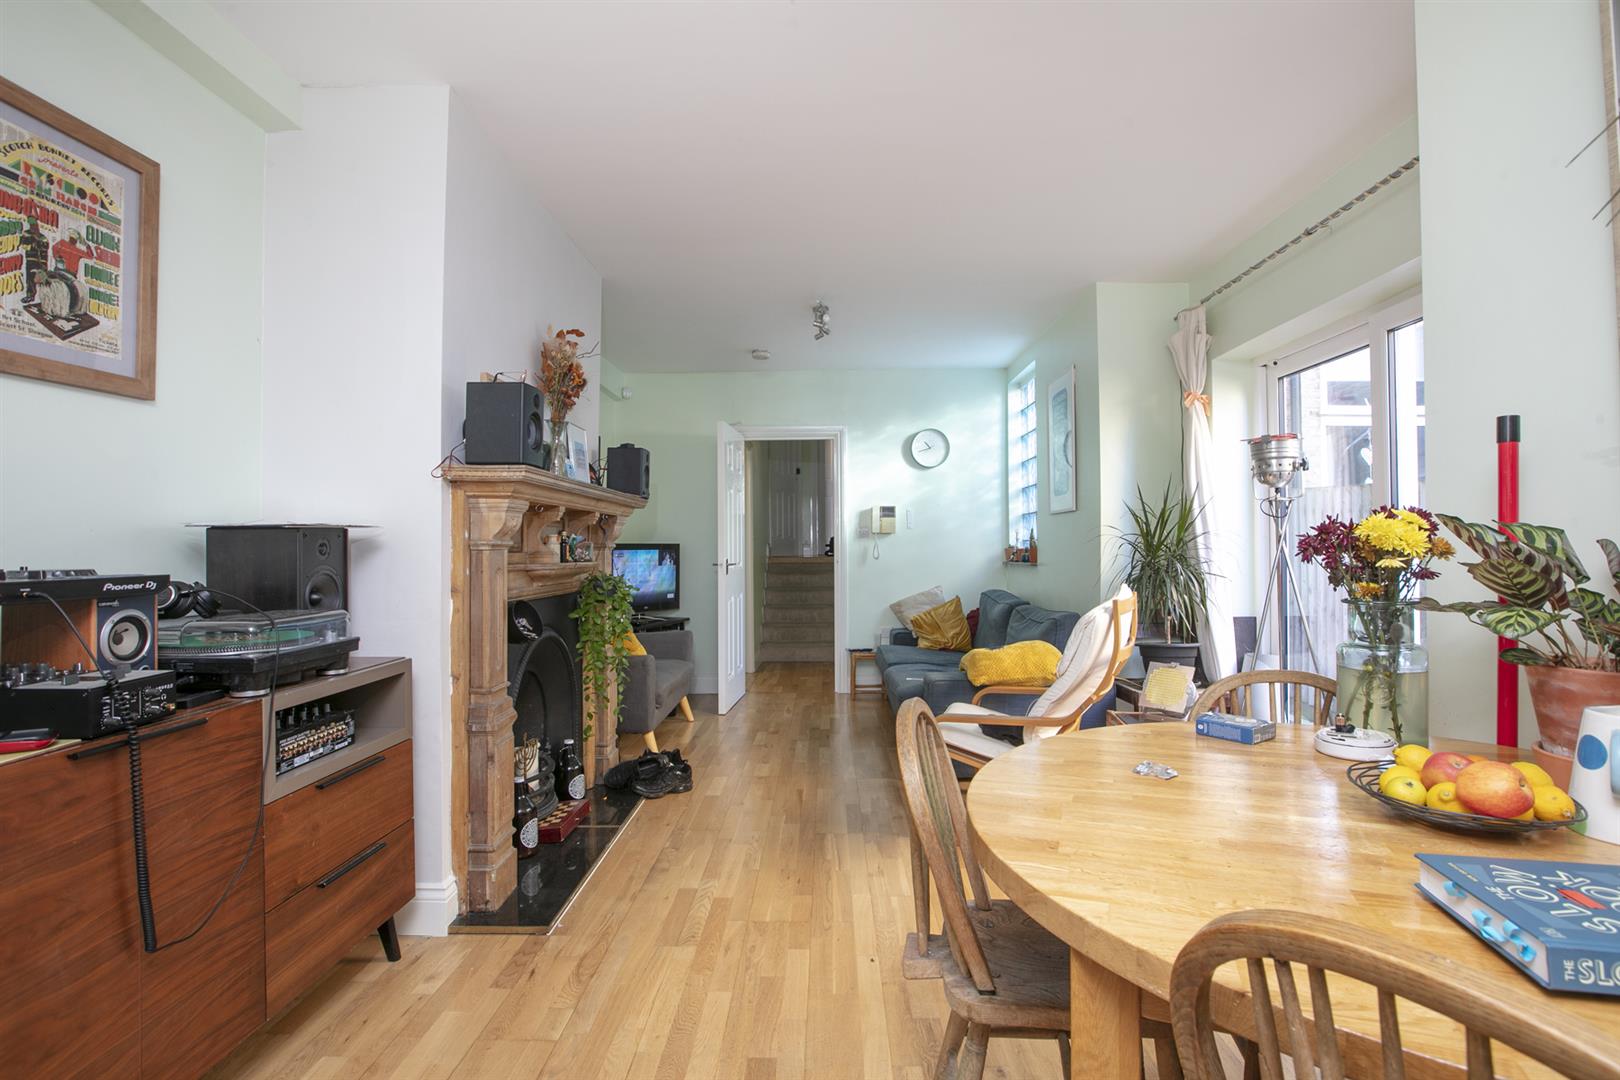 Flat - Conversion For Sale in Shenley Road, Camberwell, SE5 874 view5